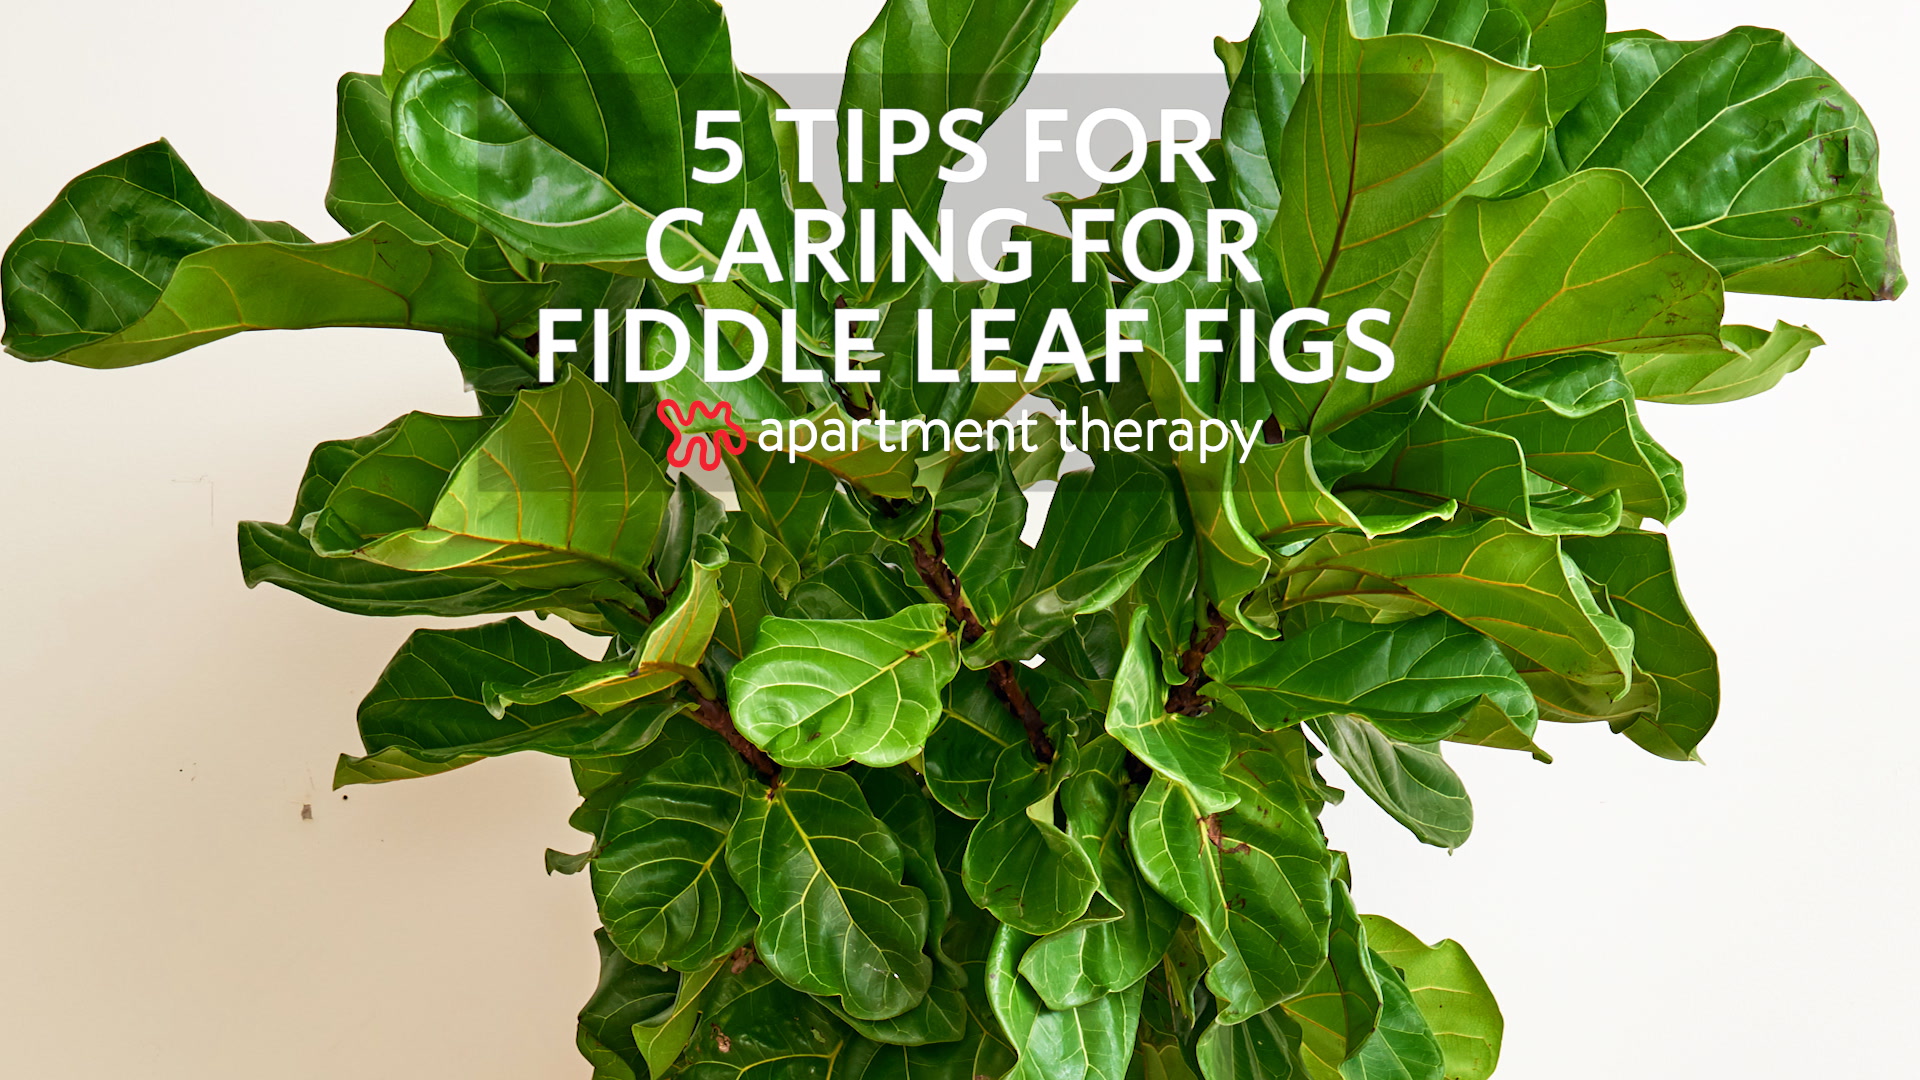 Fiddle Leaf Fig Trees - Ficus Lyrata - Growing Care | Apartment Therapy